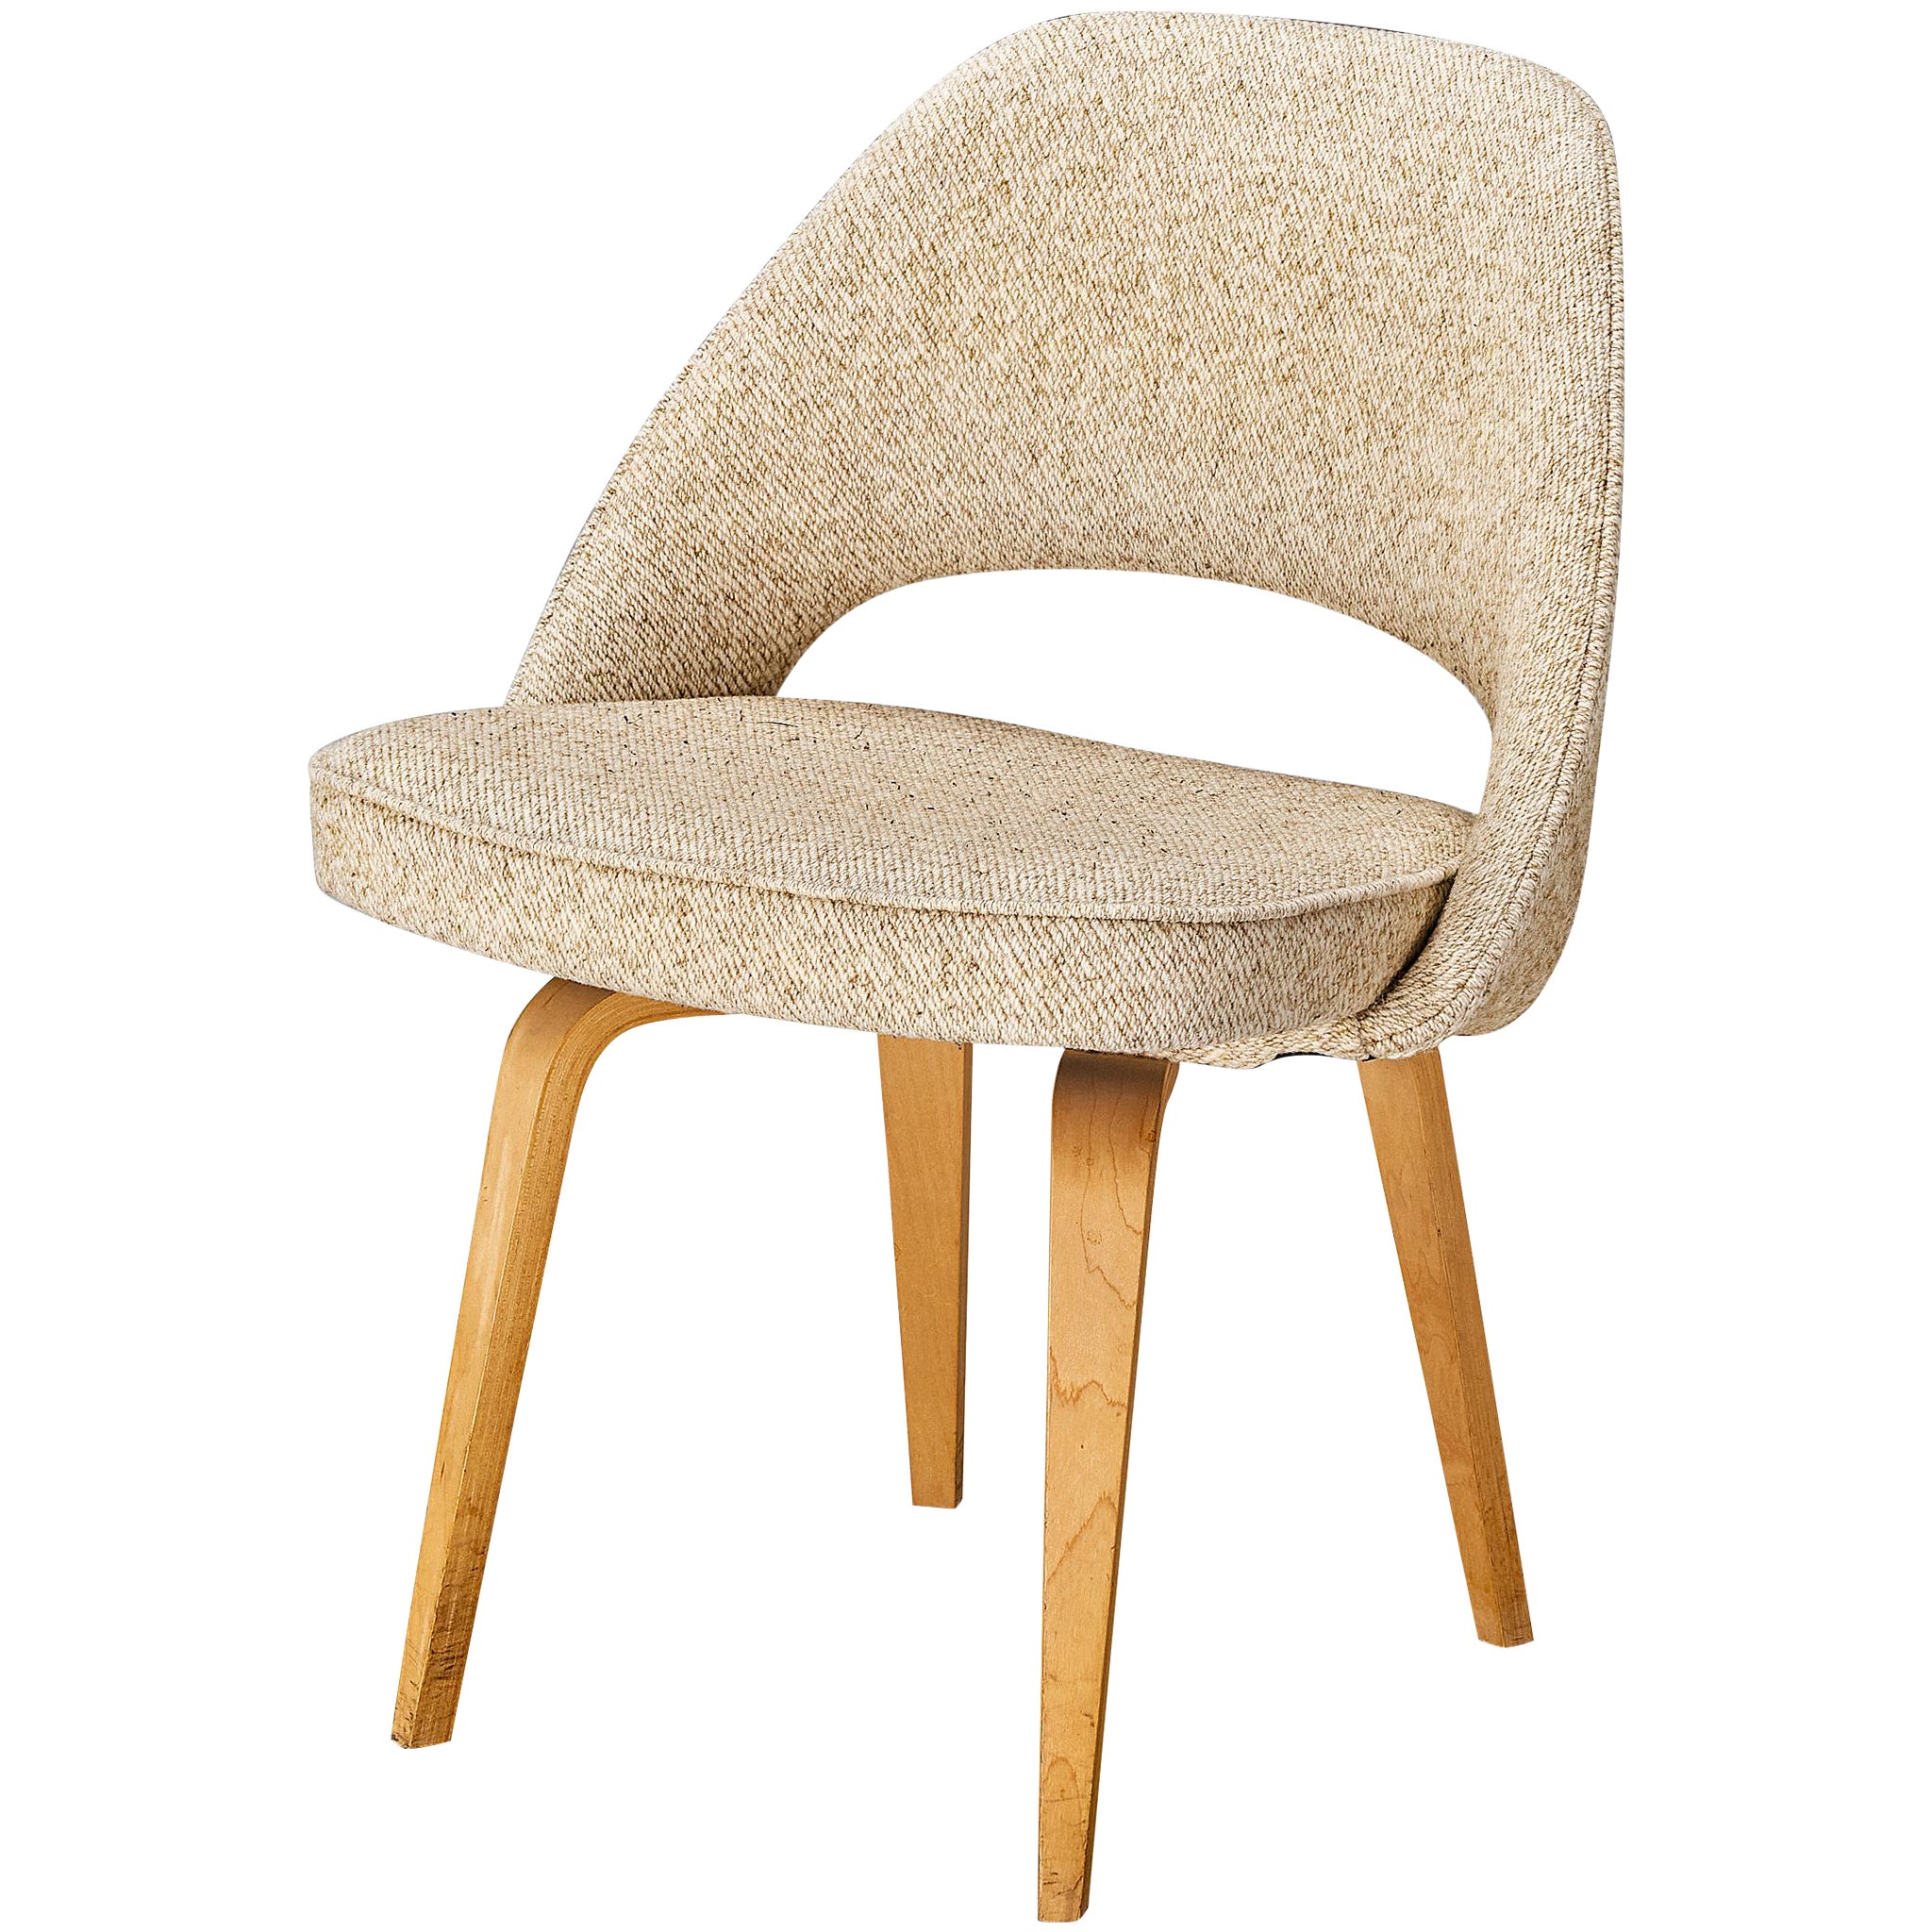 Eero Saarinen for Knoll 'Executive' Chair in Beige Creme Fabric and Oak  For Sale